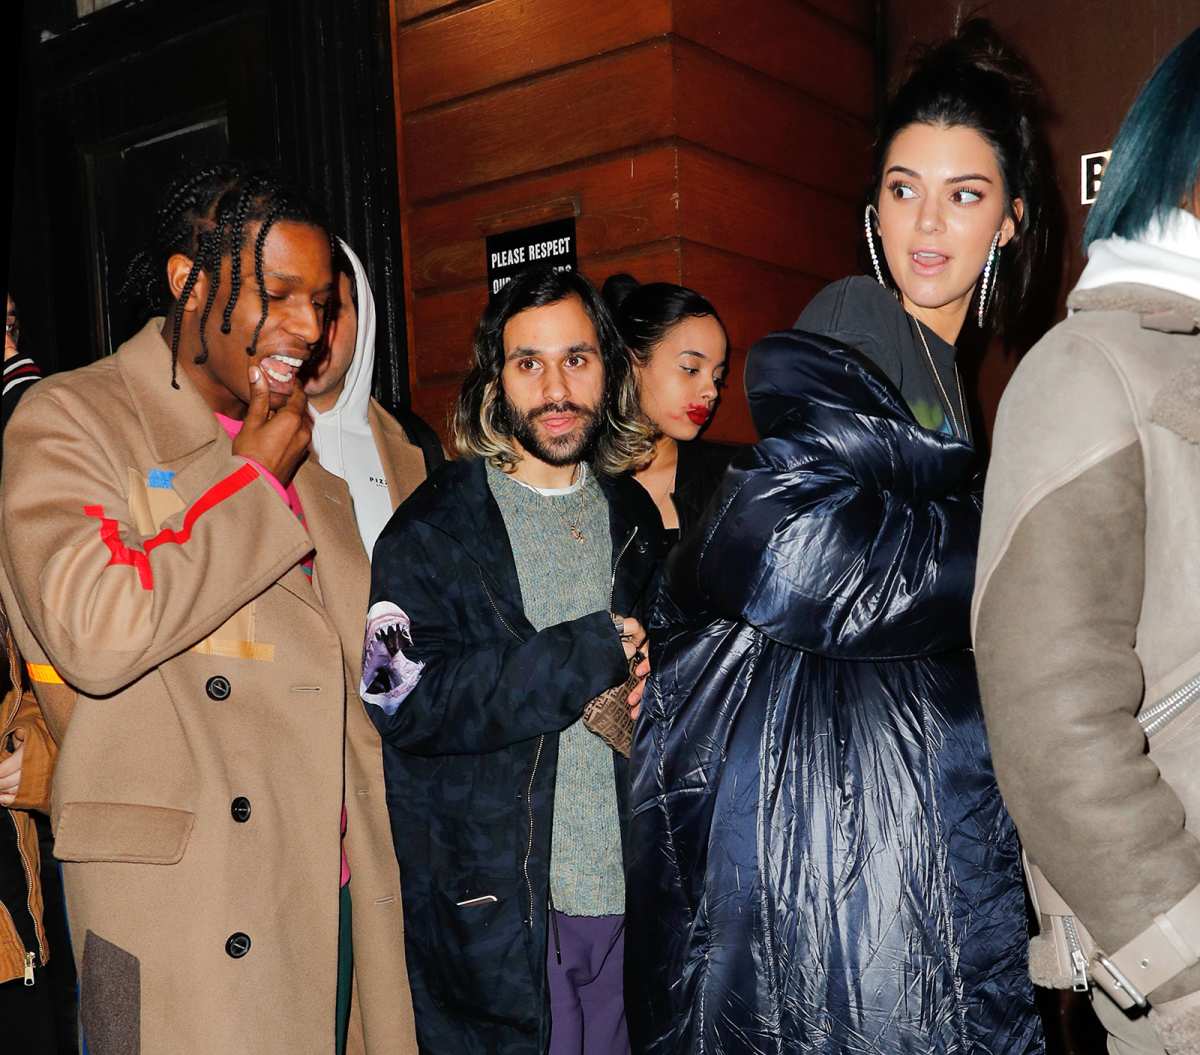 Kendall Jenner and ASAP Rocky are officially an item - Vogue Australia